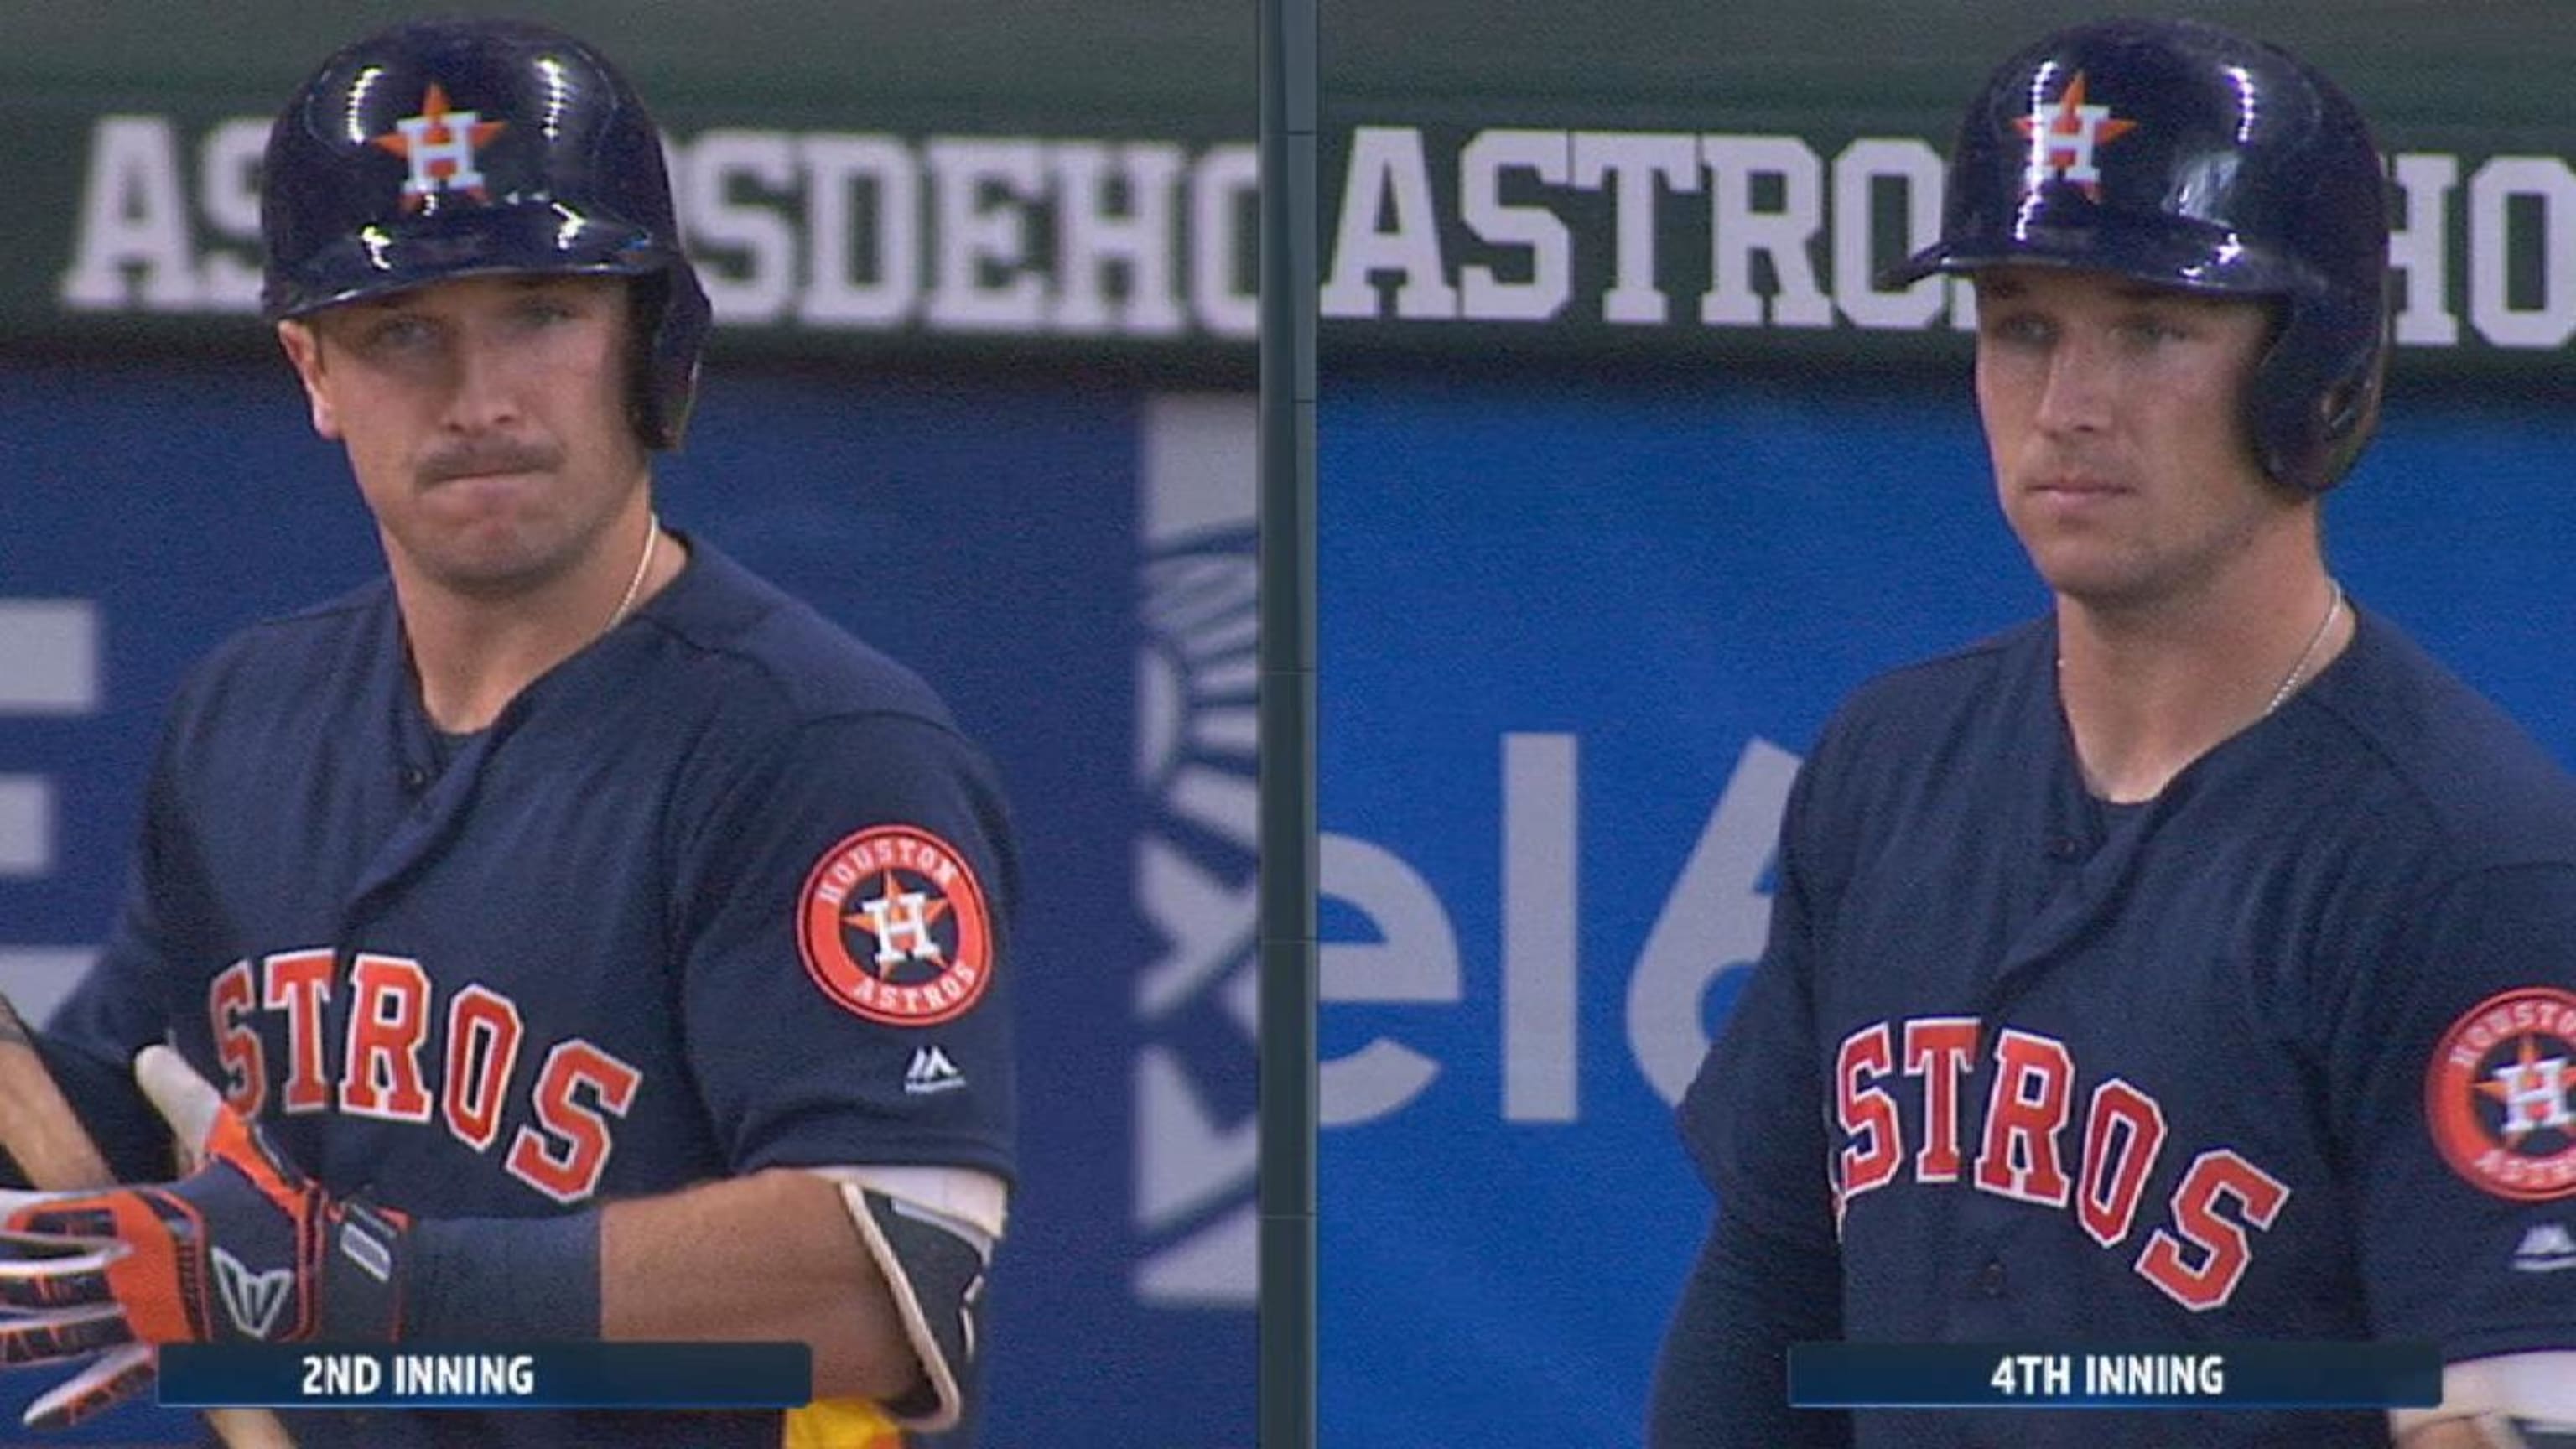 Alex Bregman shaved his mustache between at-bats because personal grooming  is very important